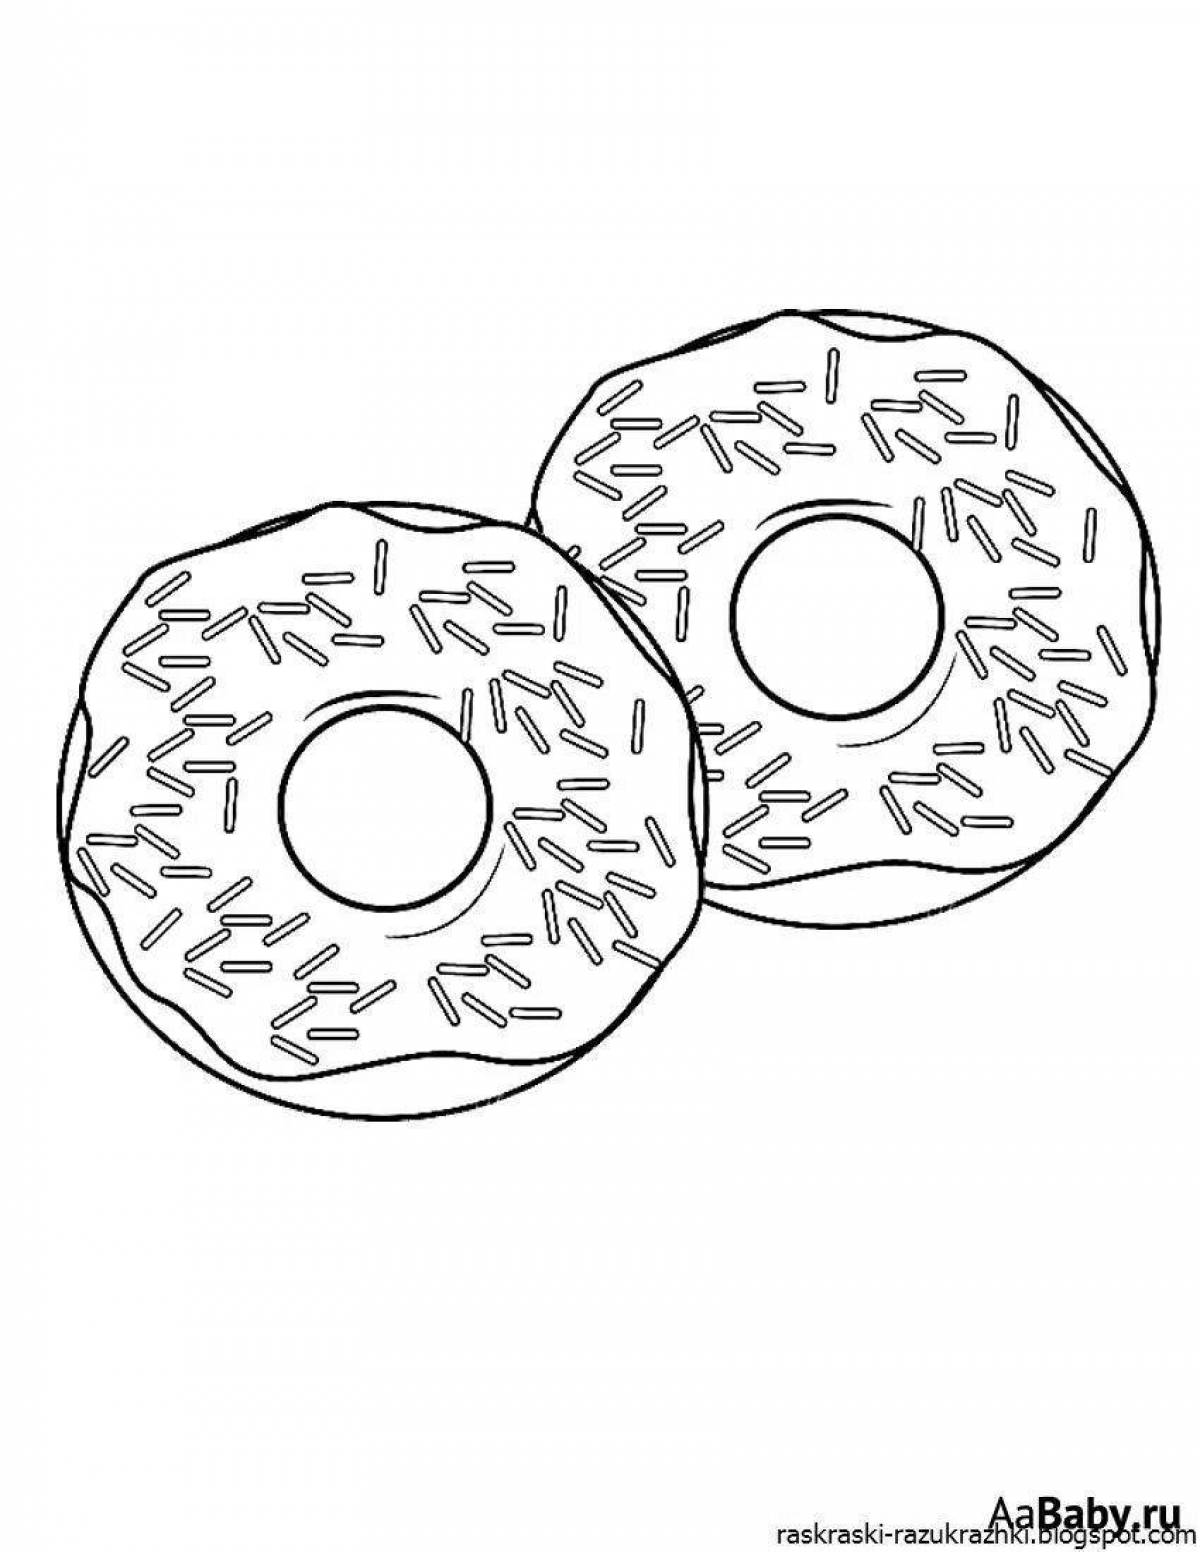 Cute donuts coloring pages for girls